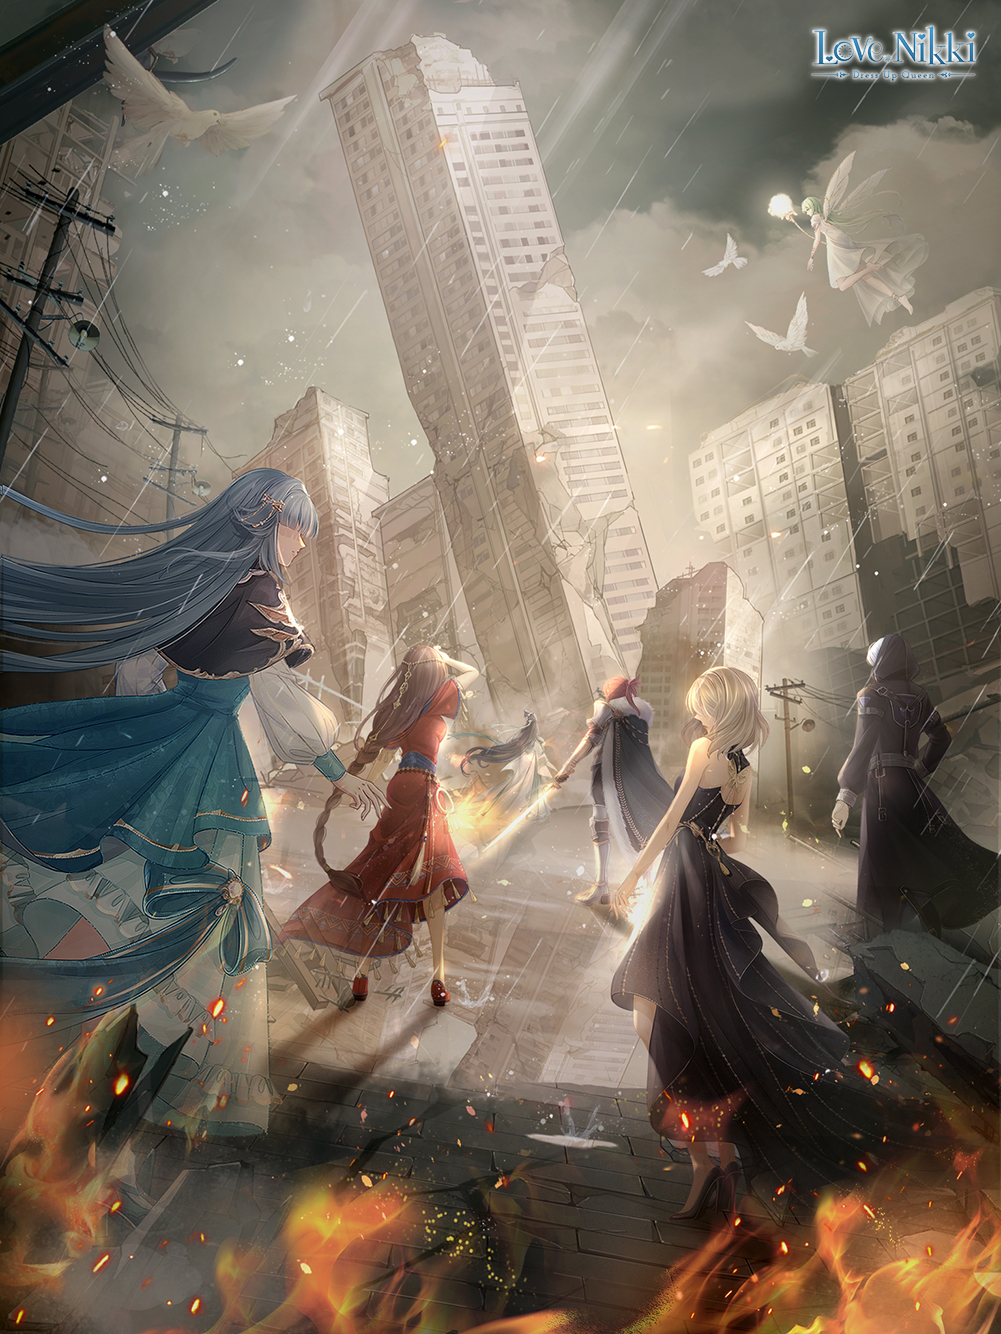 3boys 5girls bird black_dress black_jacket blonde_hair blue_dress blue_hair brown_hair cape copyright_name dove dress fire from_behind green_hair highres holding holding_sword holding_weapon insect_wings jacket long_hair miracle_nikki multiple_boys multiple_girls official_art pollution rain red_dress red_hair reflection reflective_water ruins shadow short_hair sunlight sword weapon wings